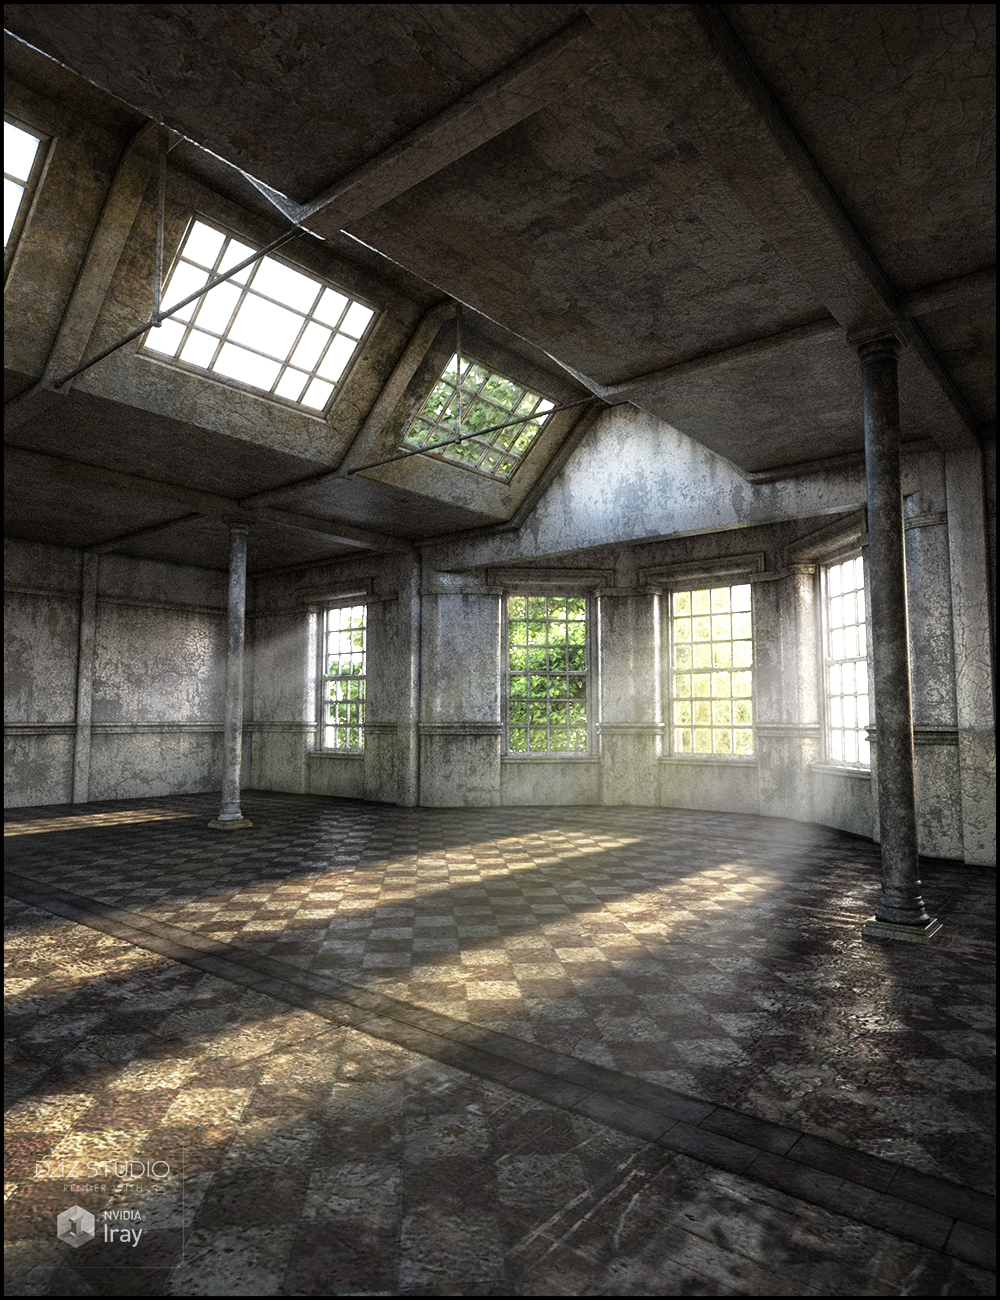 West Park Day Room Iray Addon by: Jack Tomalin, 3D Models by Daz 3D